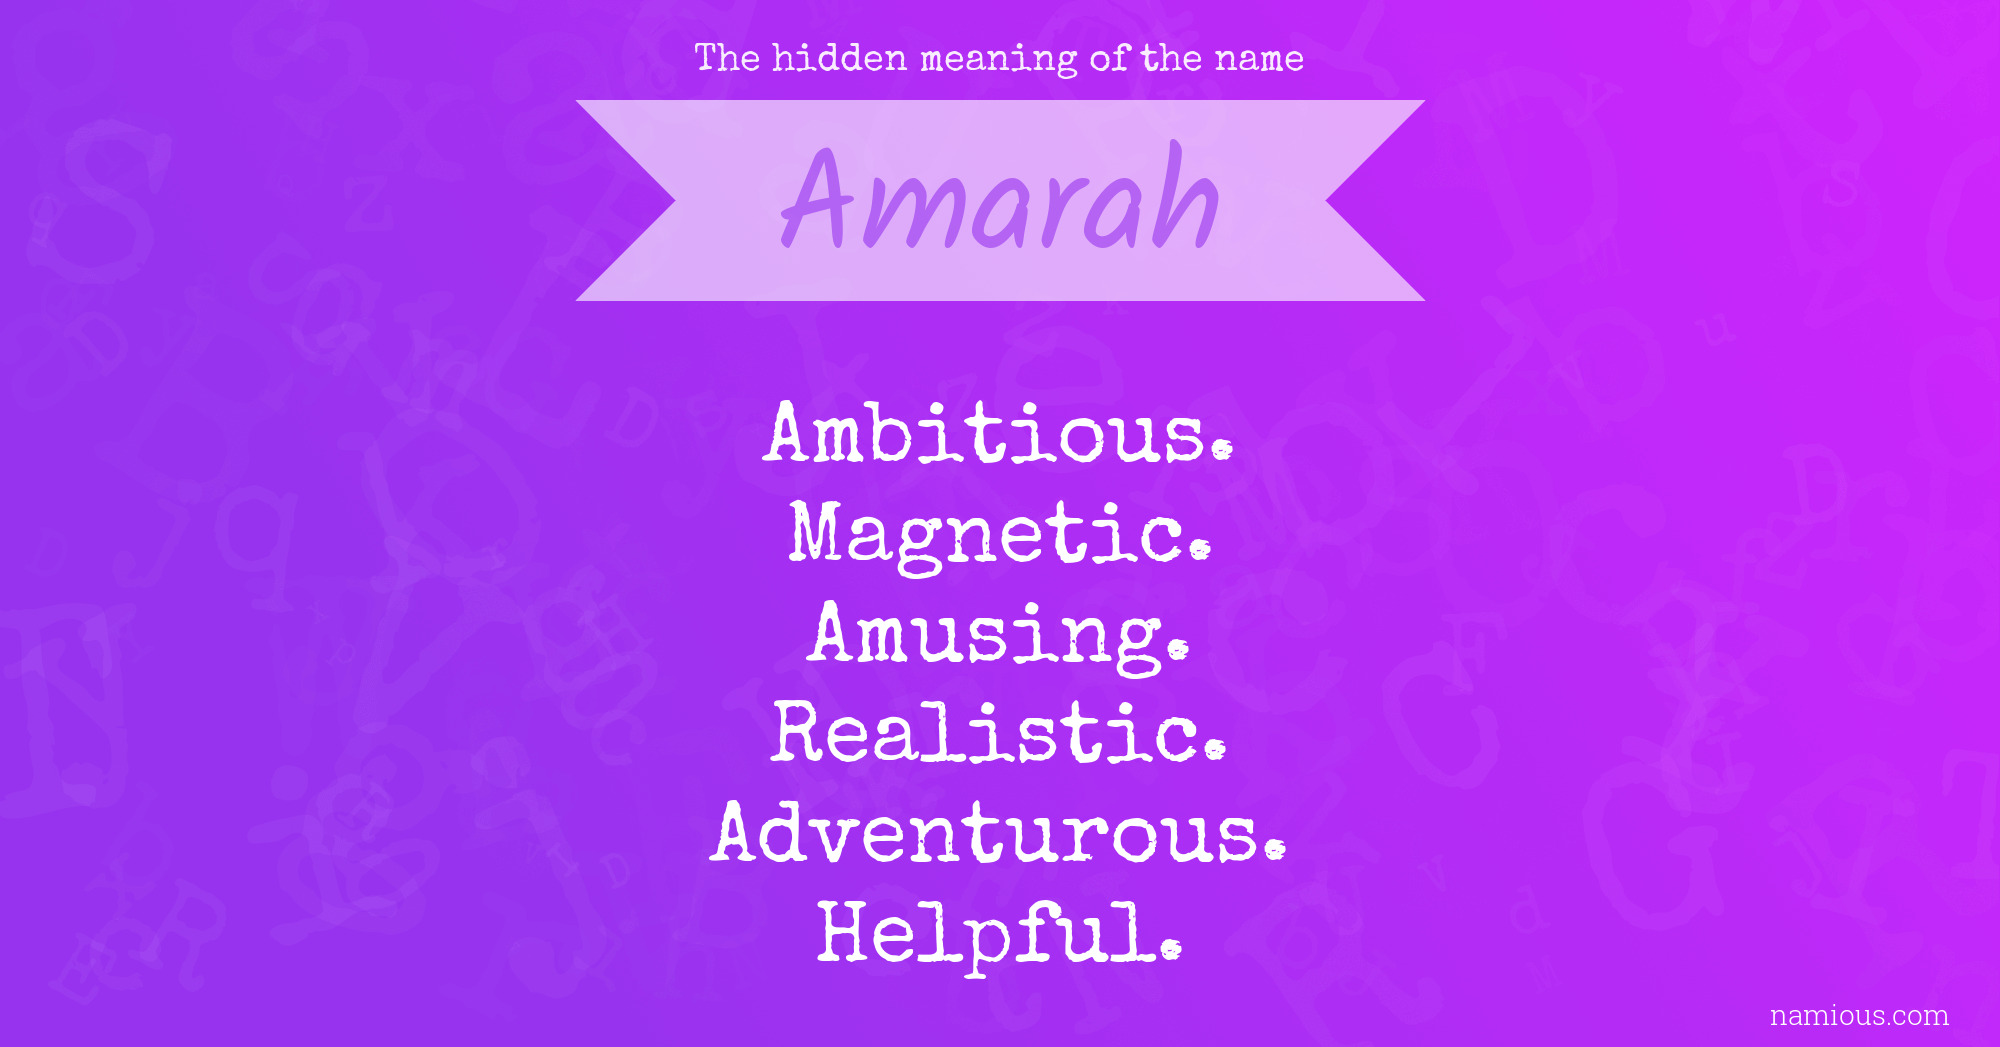 The hidden meaning of the name Amarah